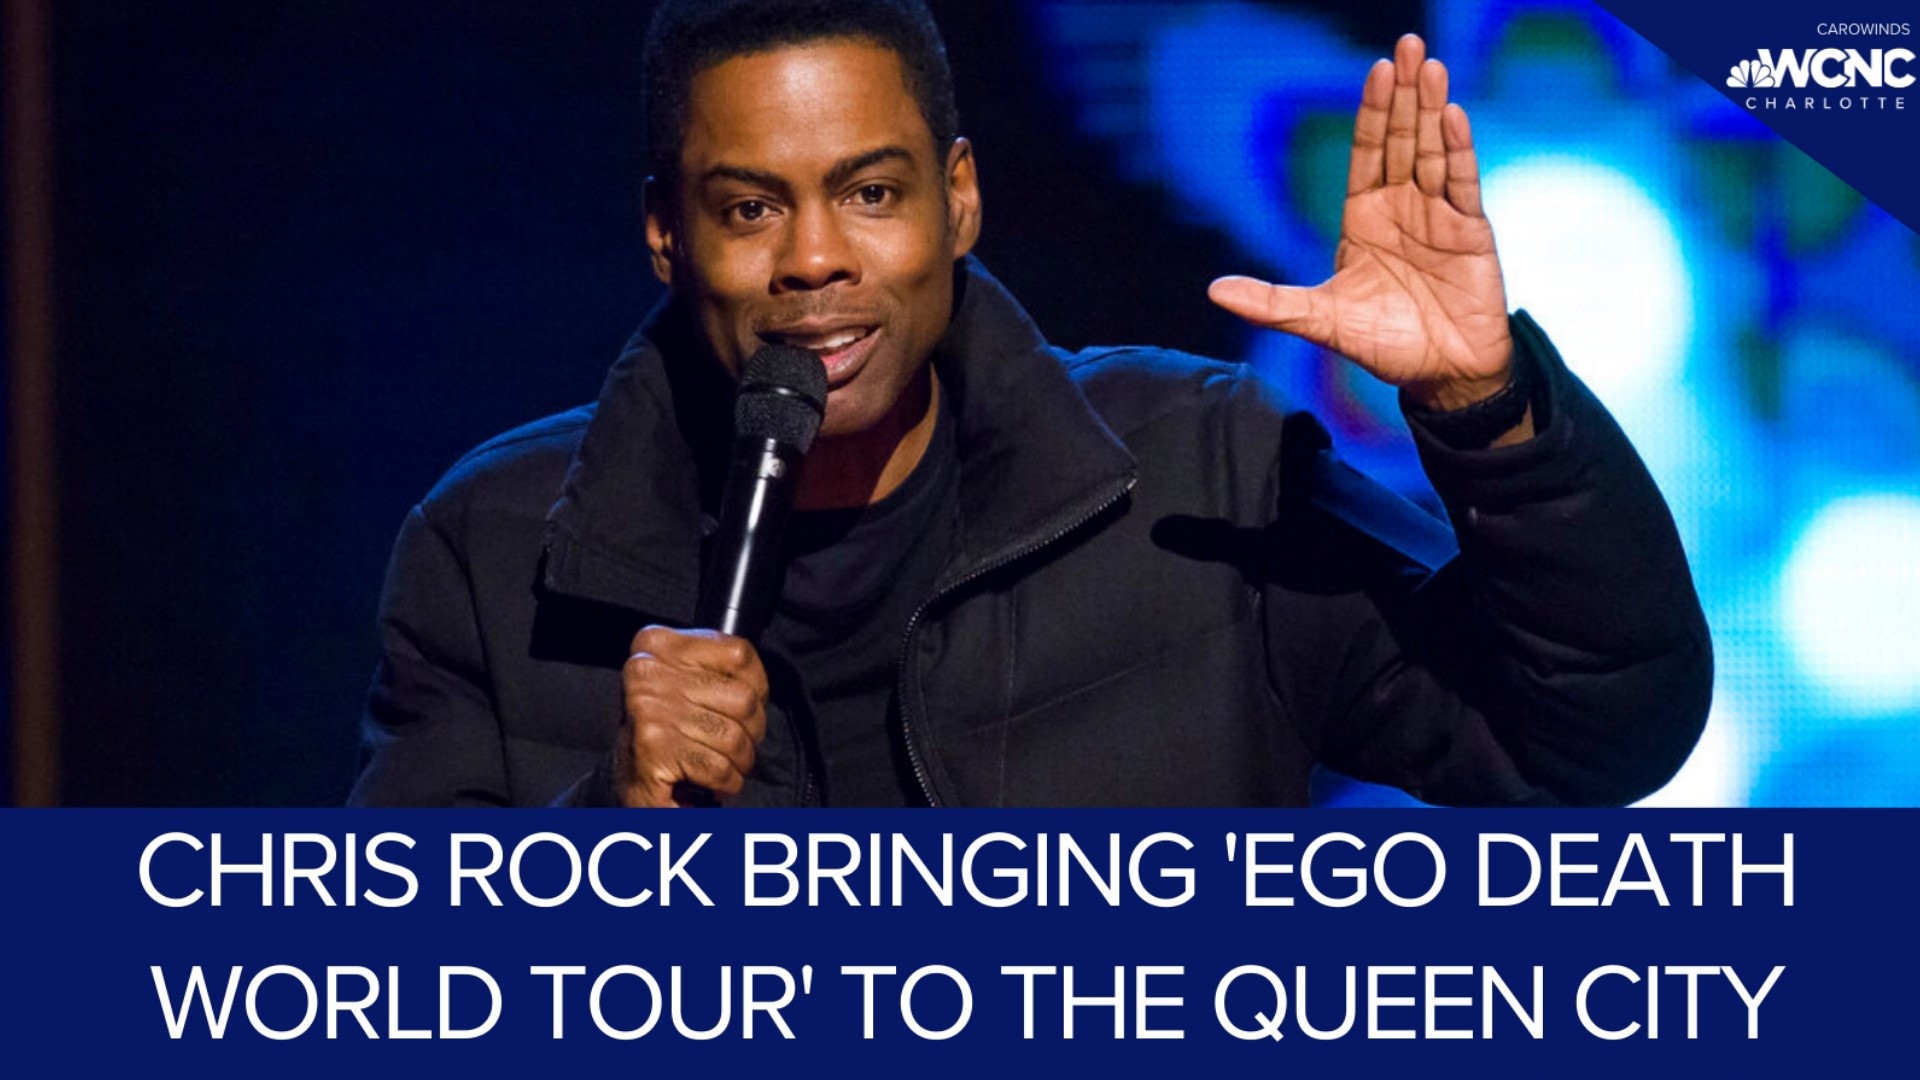 Chris Rock will perform at Ovens Auditorium on Feb. 22 as part of his "Ego Death" world tour that started shortly after the infamous Oscars slap by Will Smith.